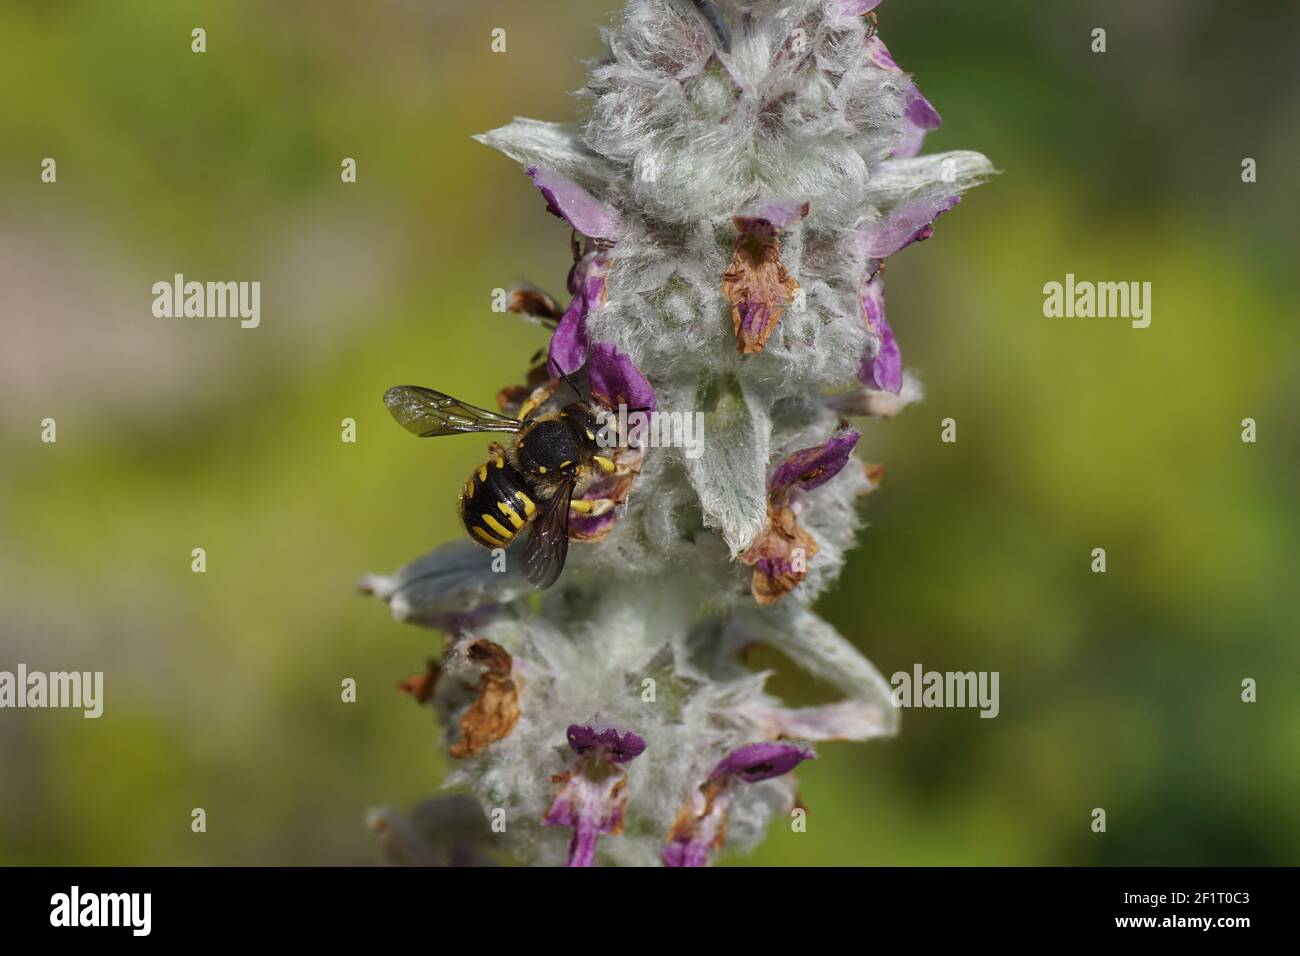 European wool carder bee (Anthidium manicatum) family Megachilidae, the leaf-cutter bees or mason bees on flowers of lamb's-ear or woolly hedgenettle. Stock Photo